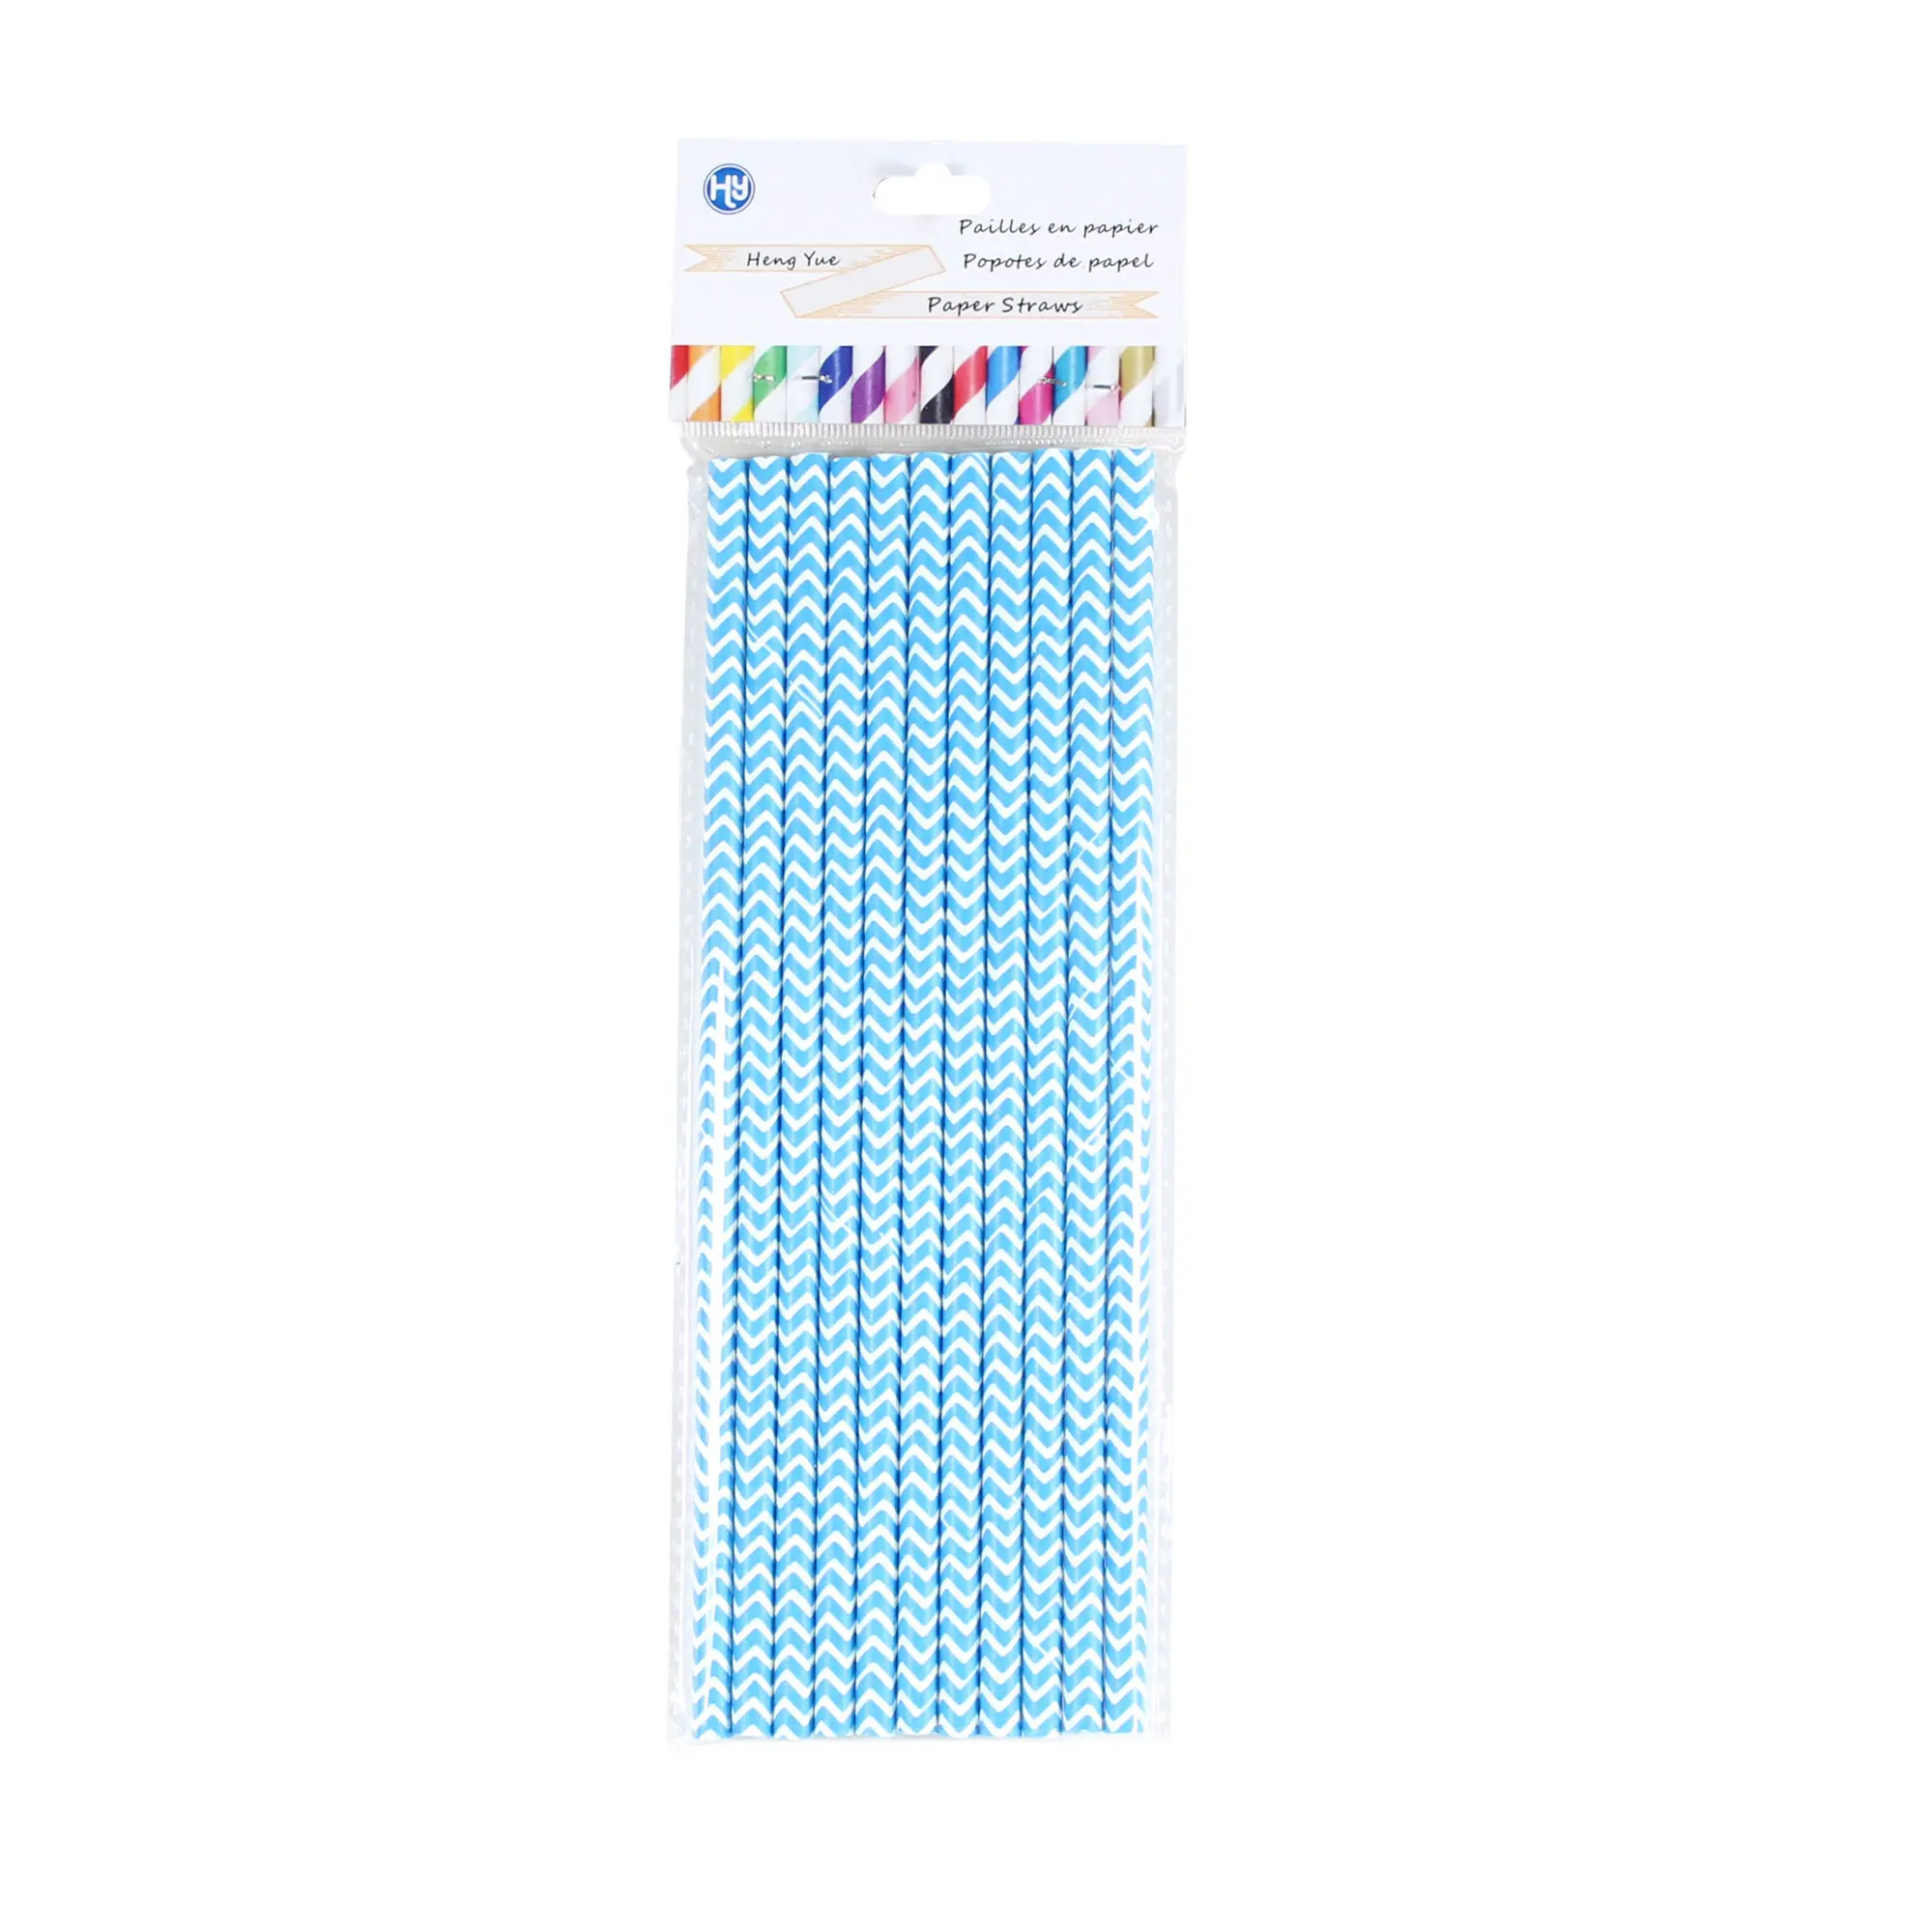 100pcs/bag High Quality Virgin Wood Pulp Paper Straws 6*197 mm Independent Packaging Paper Straws Disposable Kraft Paper Straws